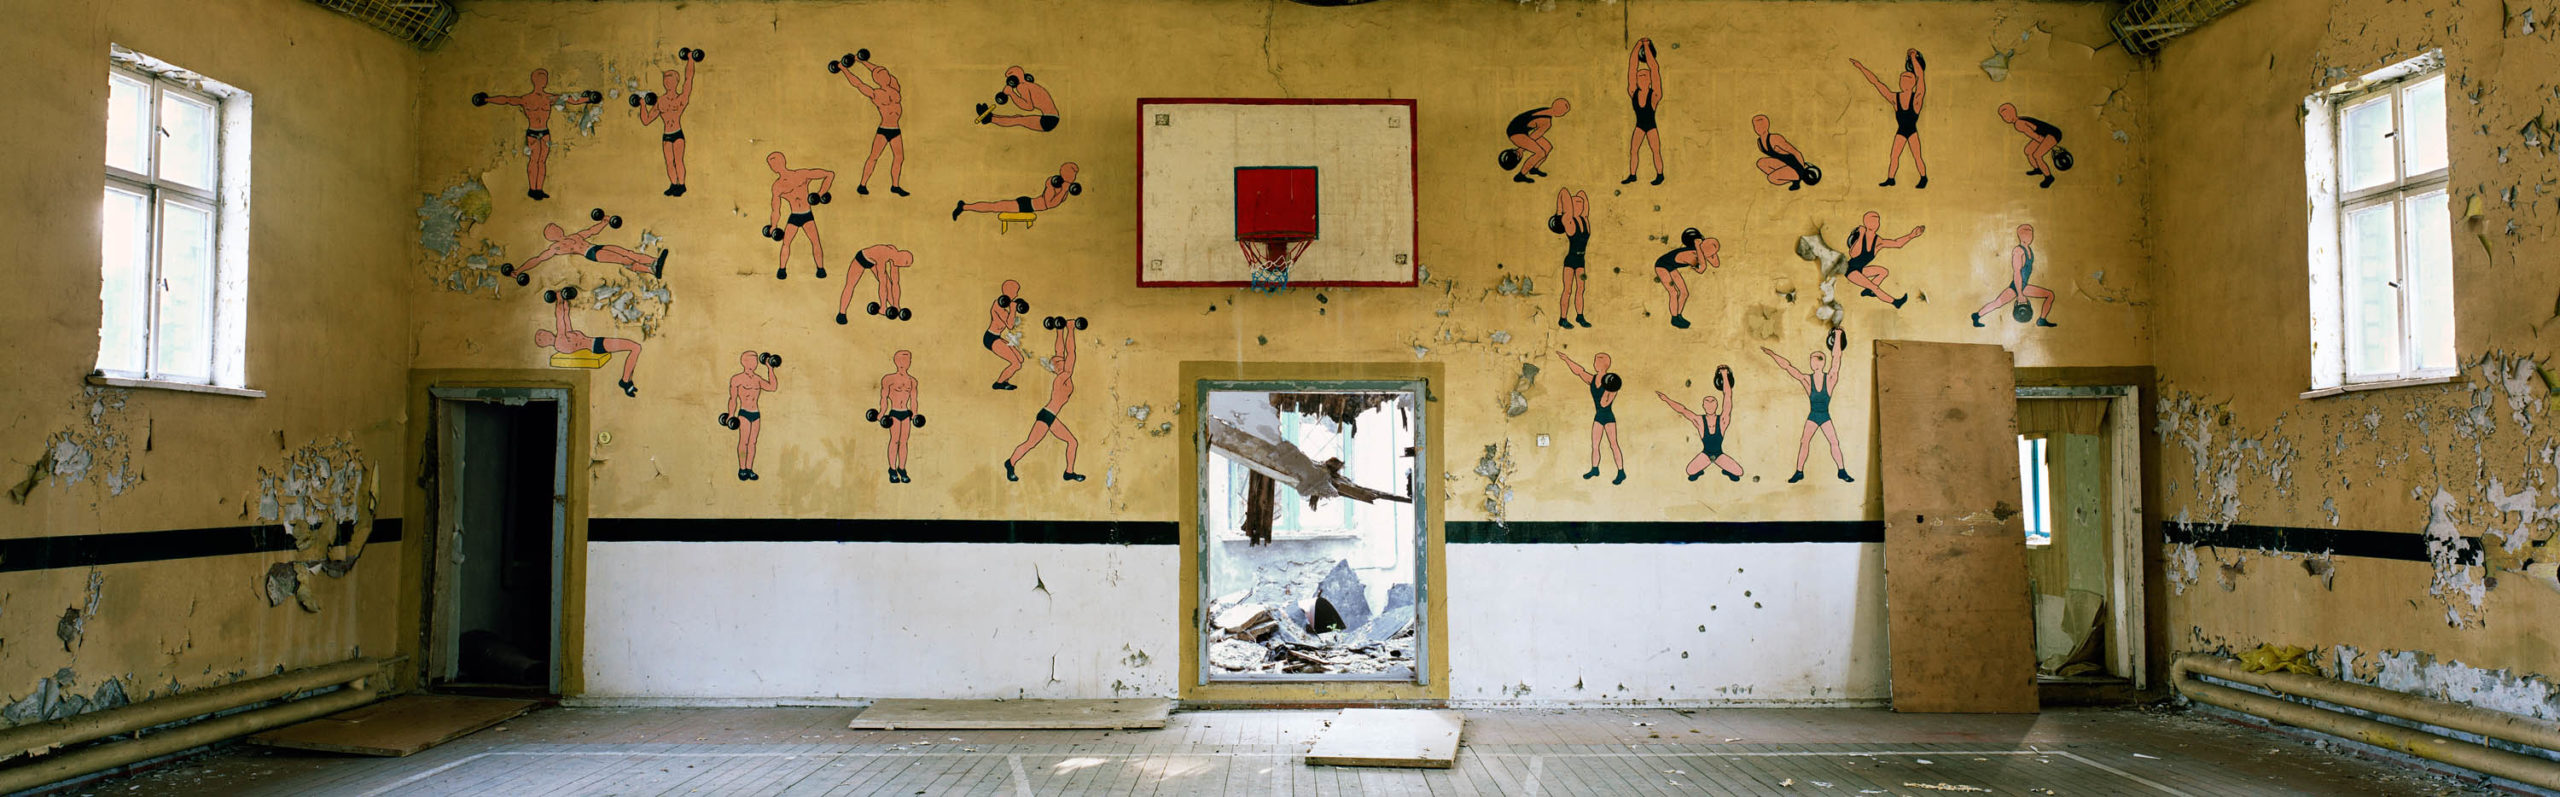 East Germany. Sports hall at a Soviet Army base